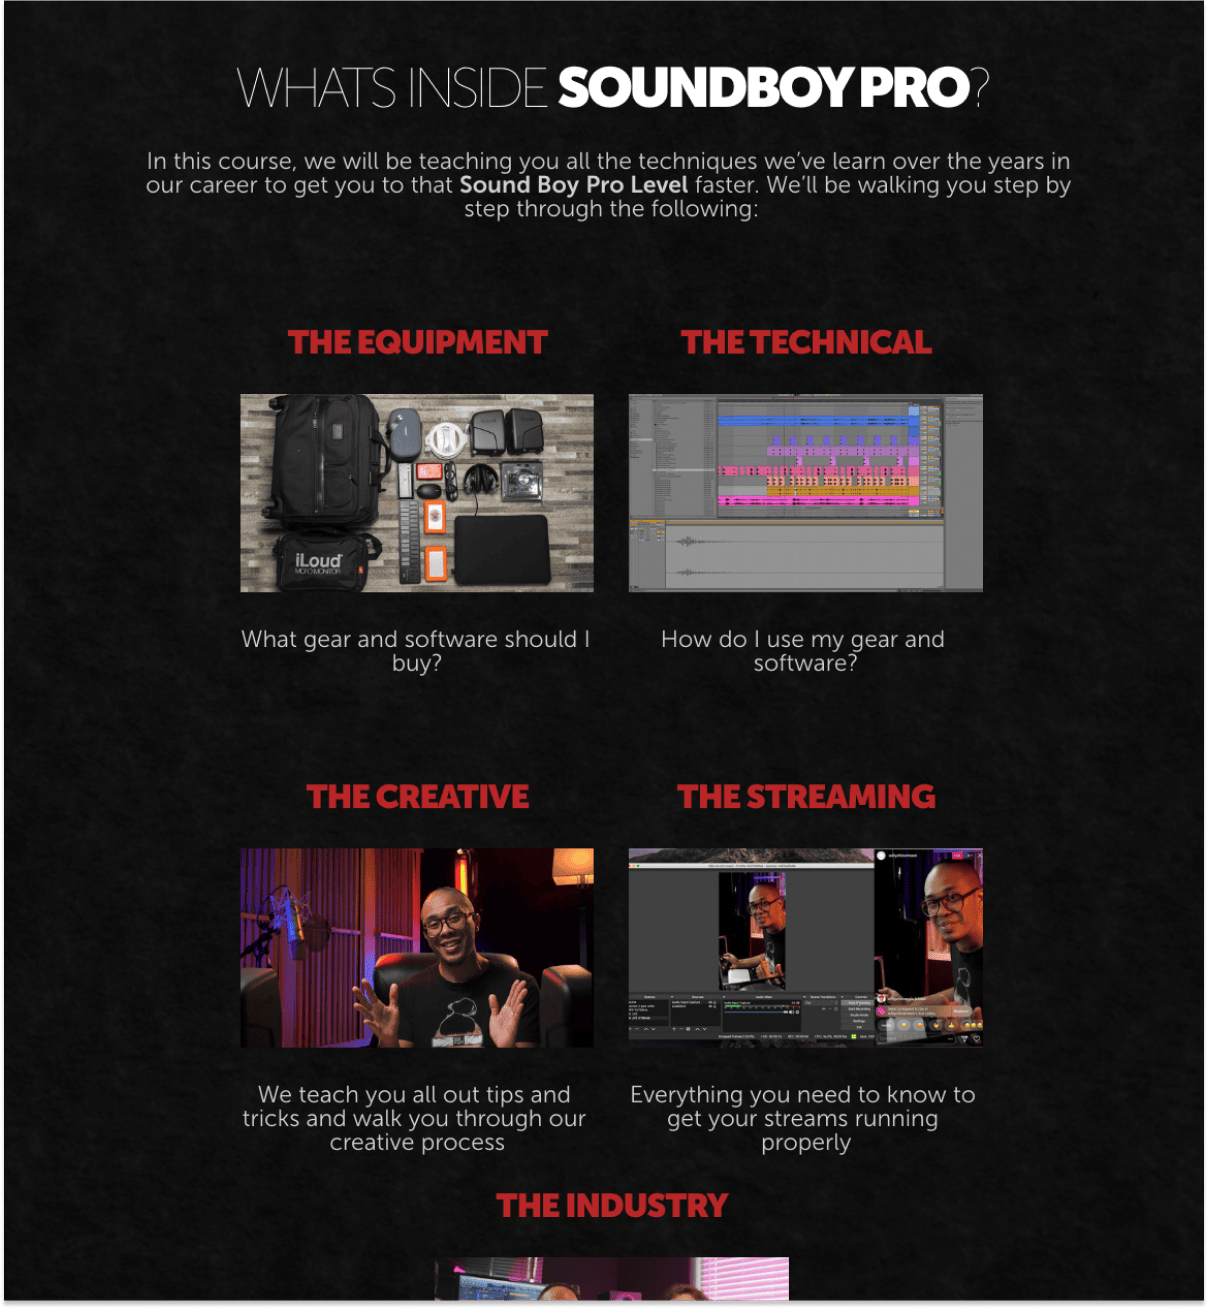 What's included in the Soundboy Pro's course